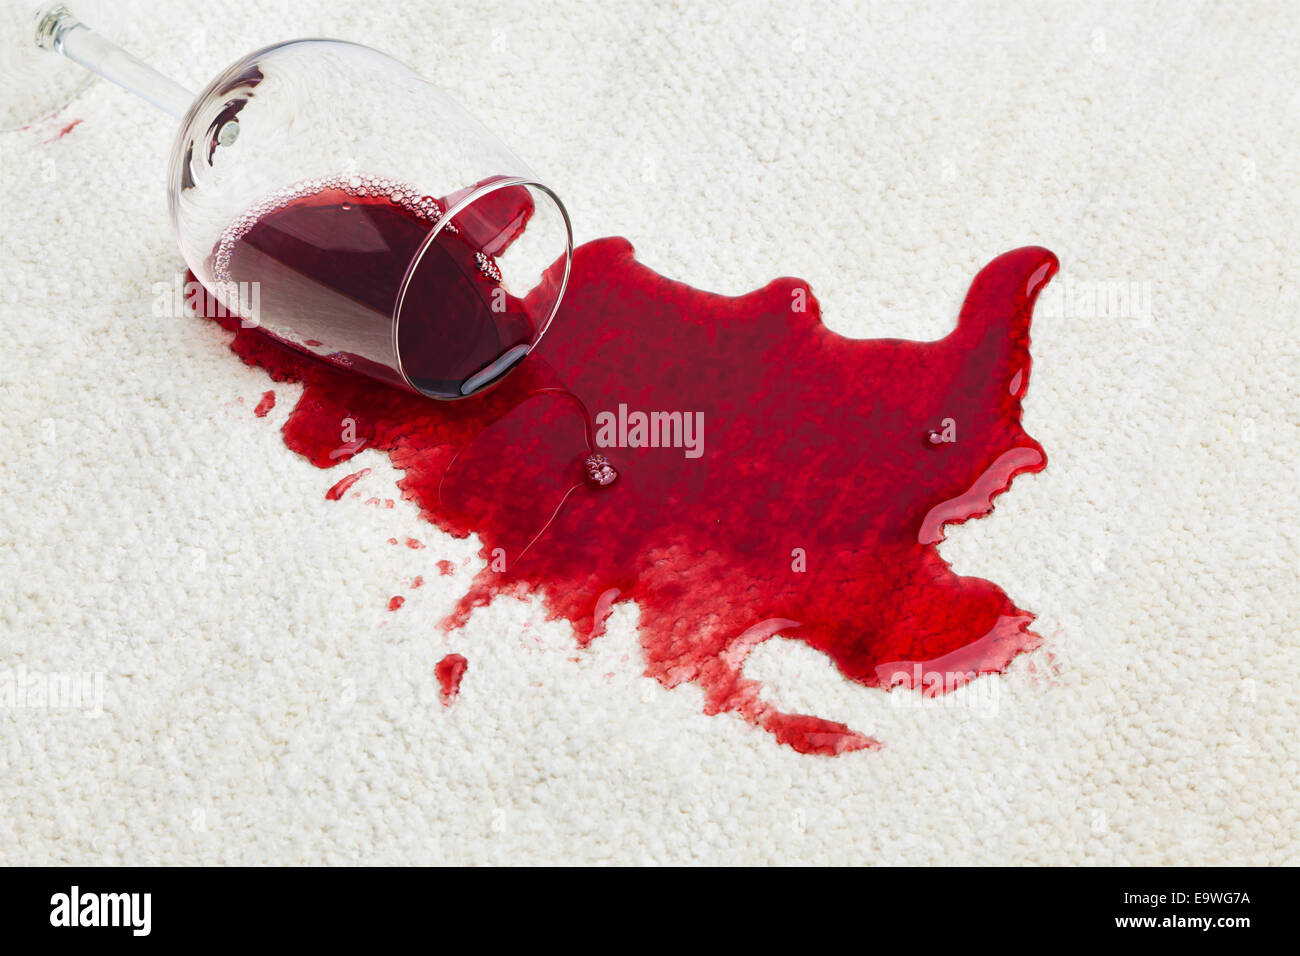 Red wine is spilled on a carpet. Glass fallen over Stock Photo